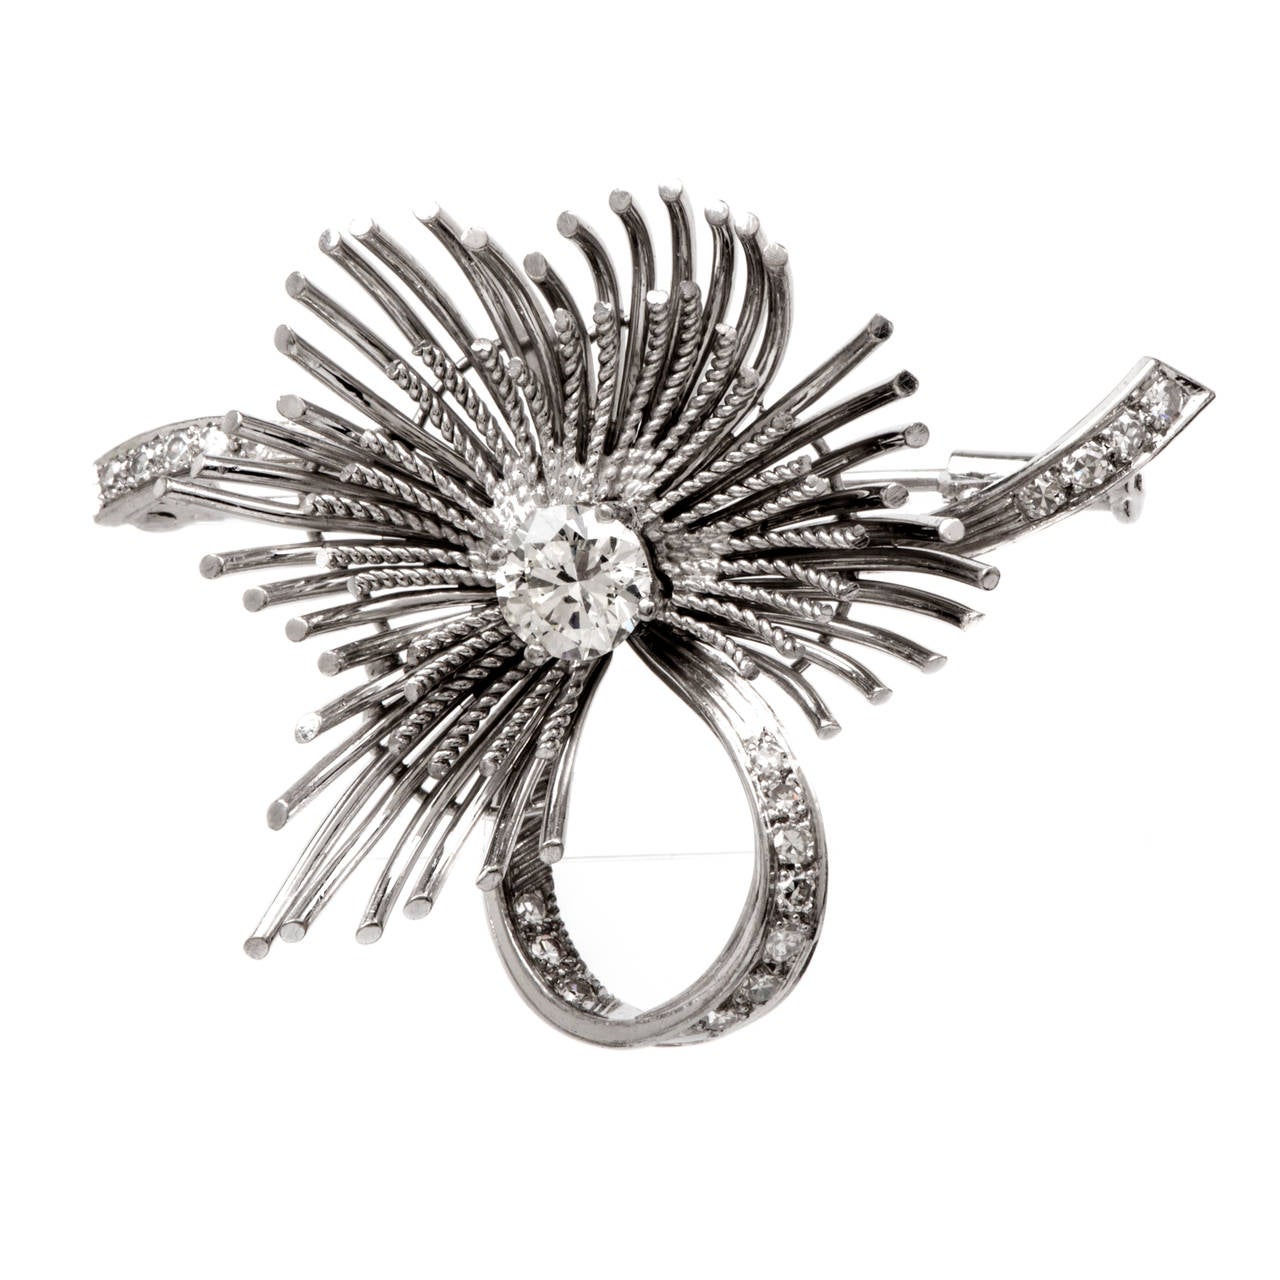 This floral pin brooch with diamond of European provenance is crafted in solid platinum, weighs approx. 17.1 grams and measures approx. 2